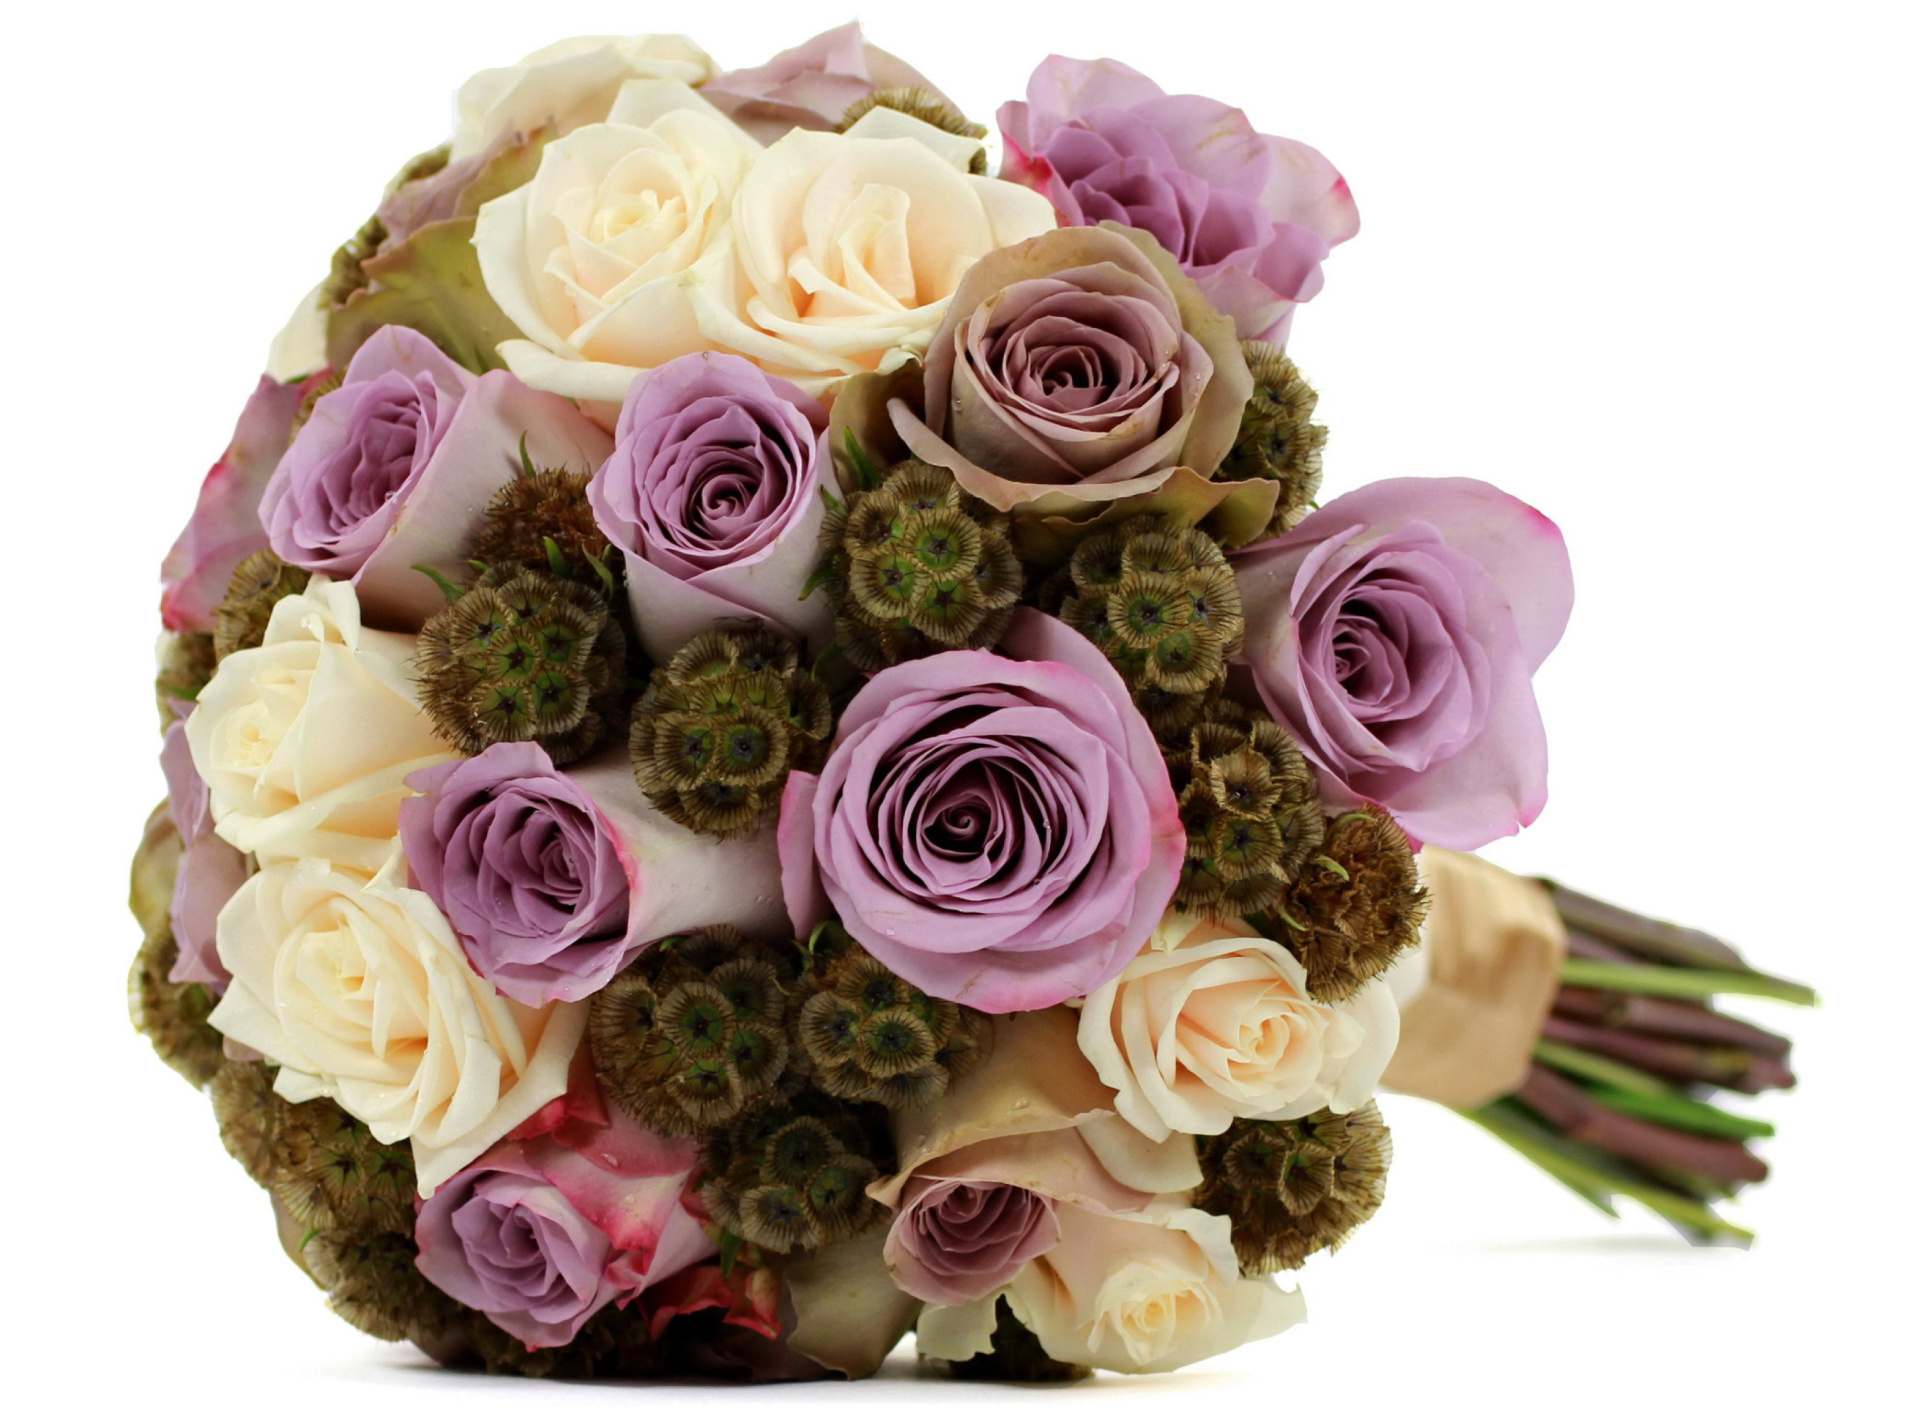 Das Bouquet with lilac roses Wallpaper 1920x1408